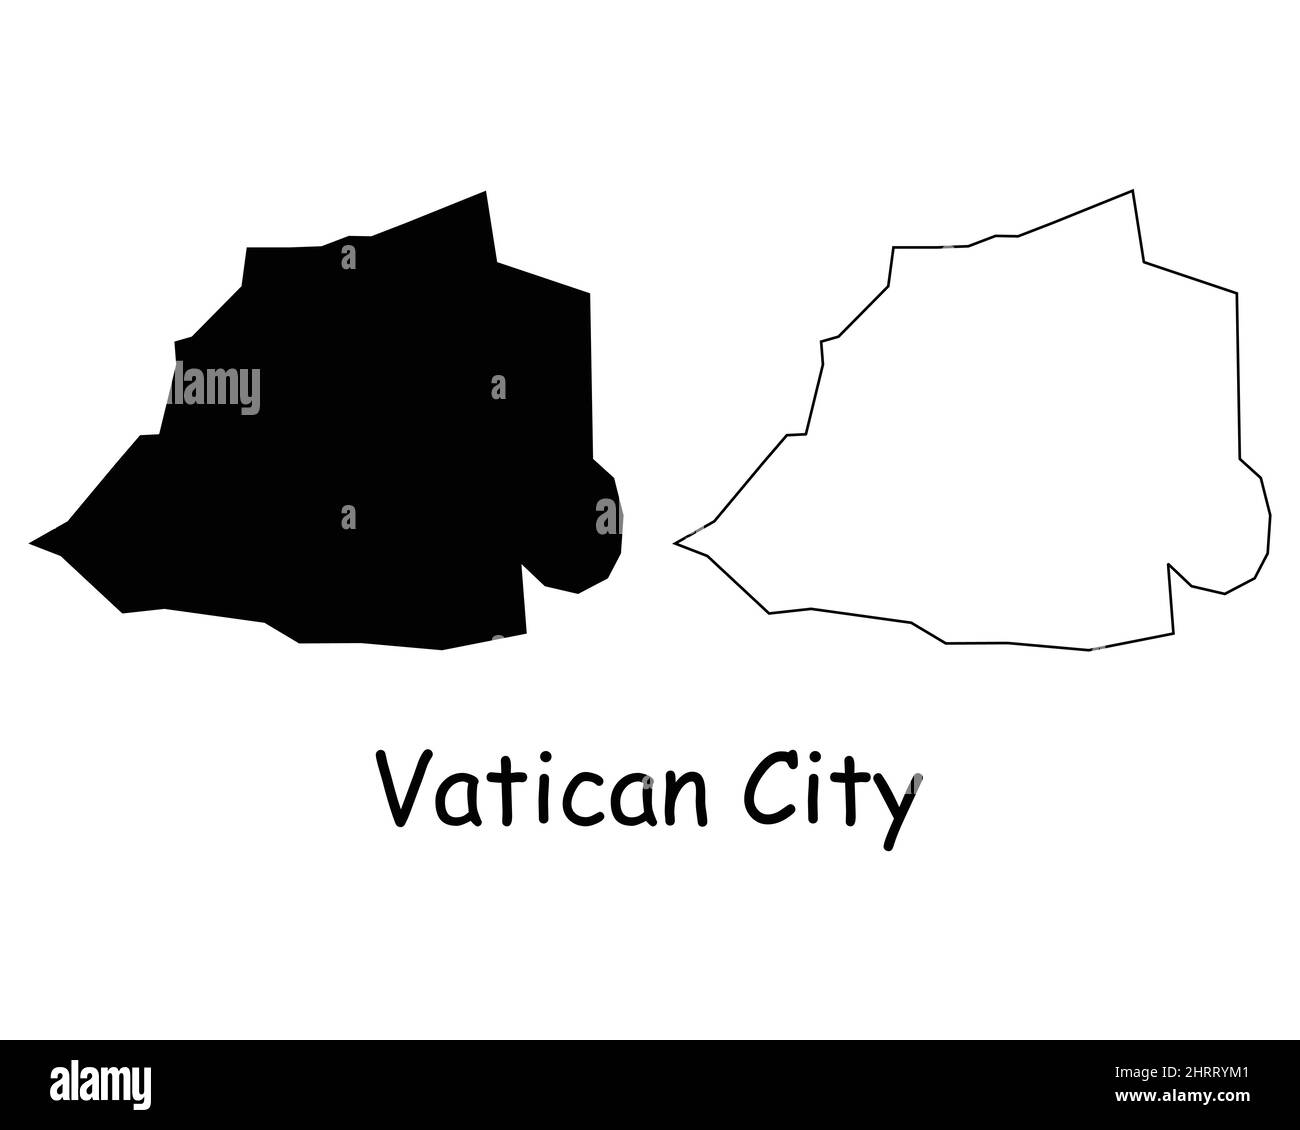 Vatican City Map. Holy See Black silhouette and outline map isolated on white background. Vatican City State Territory Border Boundary Line Icon Sign Stock Vector